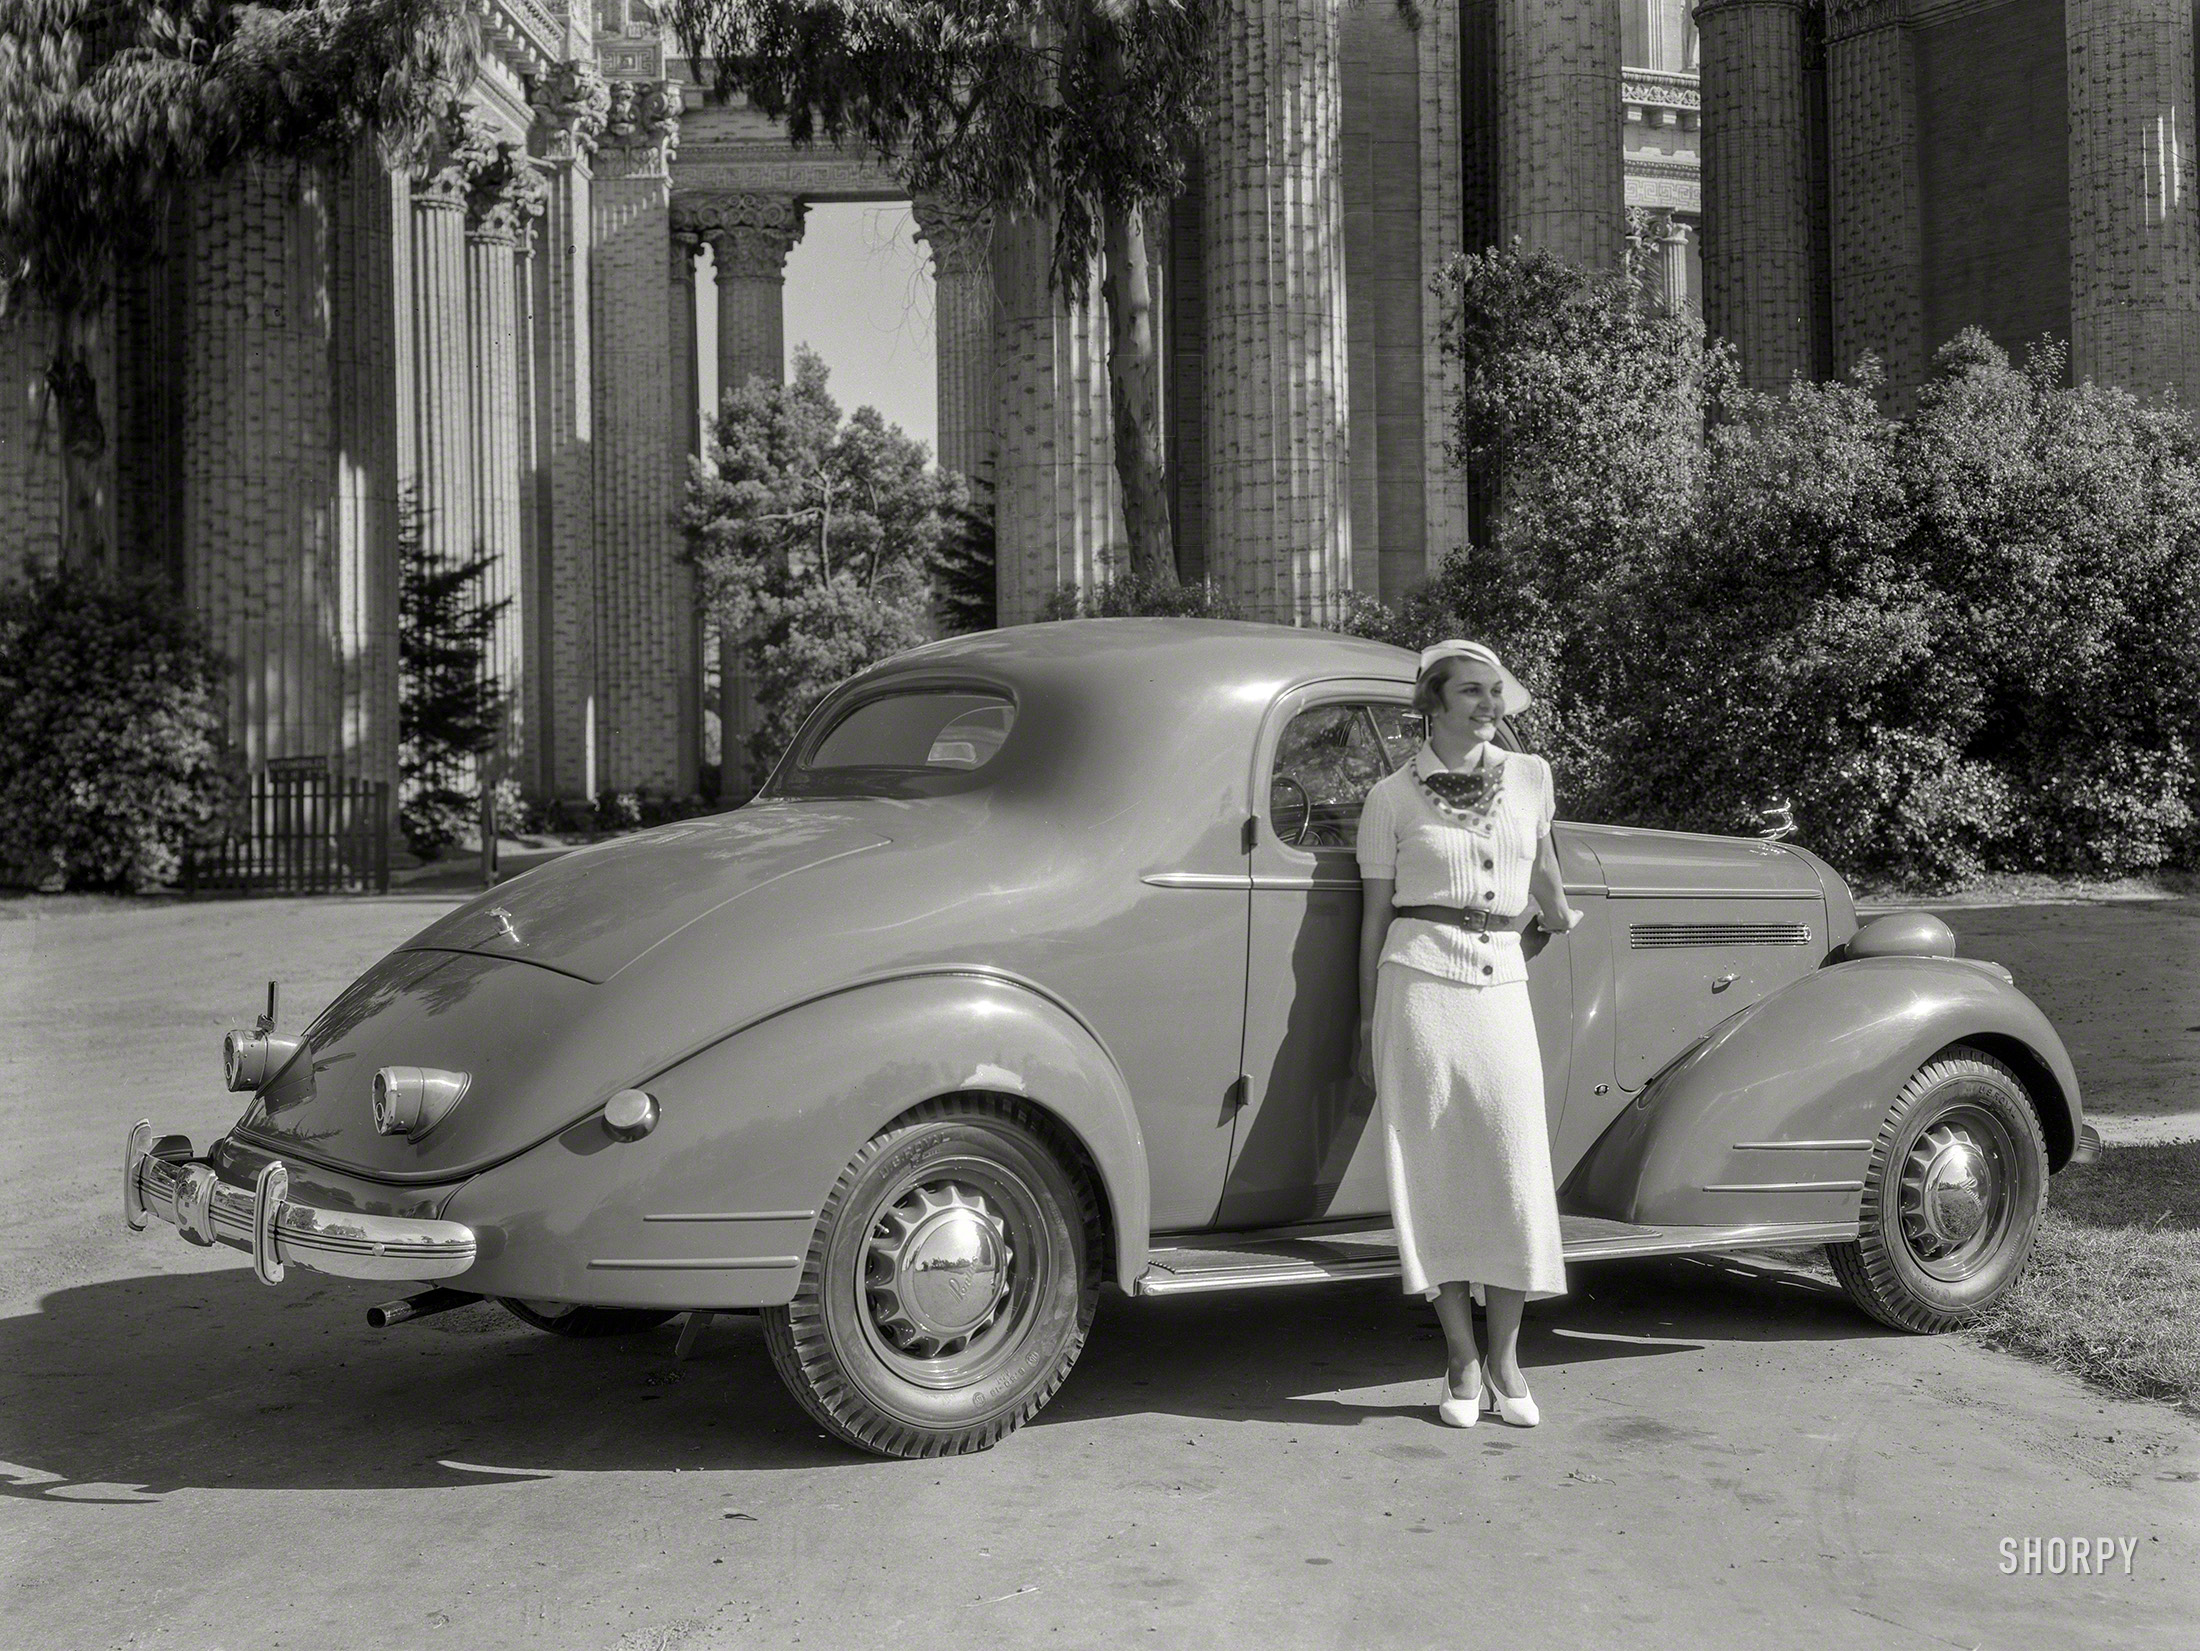 May 21, 1935. "Pontiac coupe at San Francisco Palace of Fine Arts." Today's bullet point on the Shorpy Timeline of Triassic Transportation. 8x10 inch nitrate negative, originally from the Wyland Stanley collection. View full size.